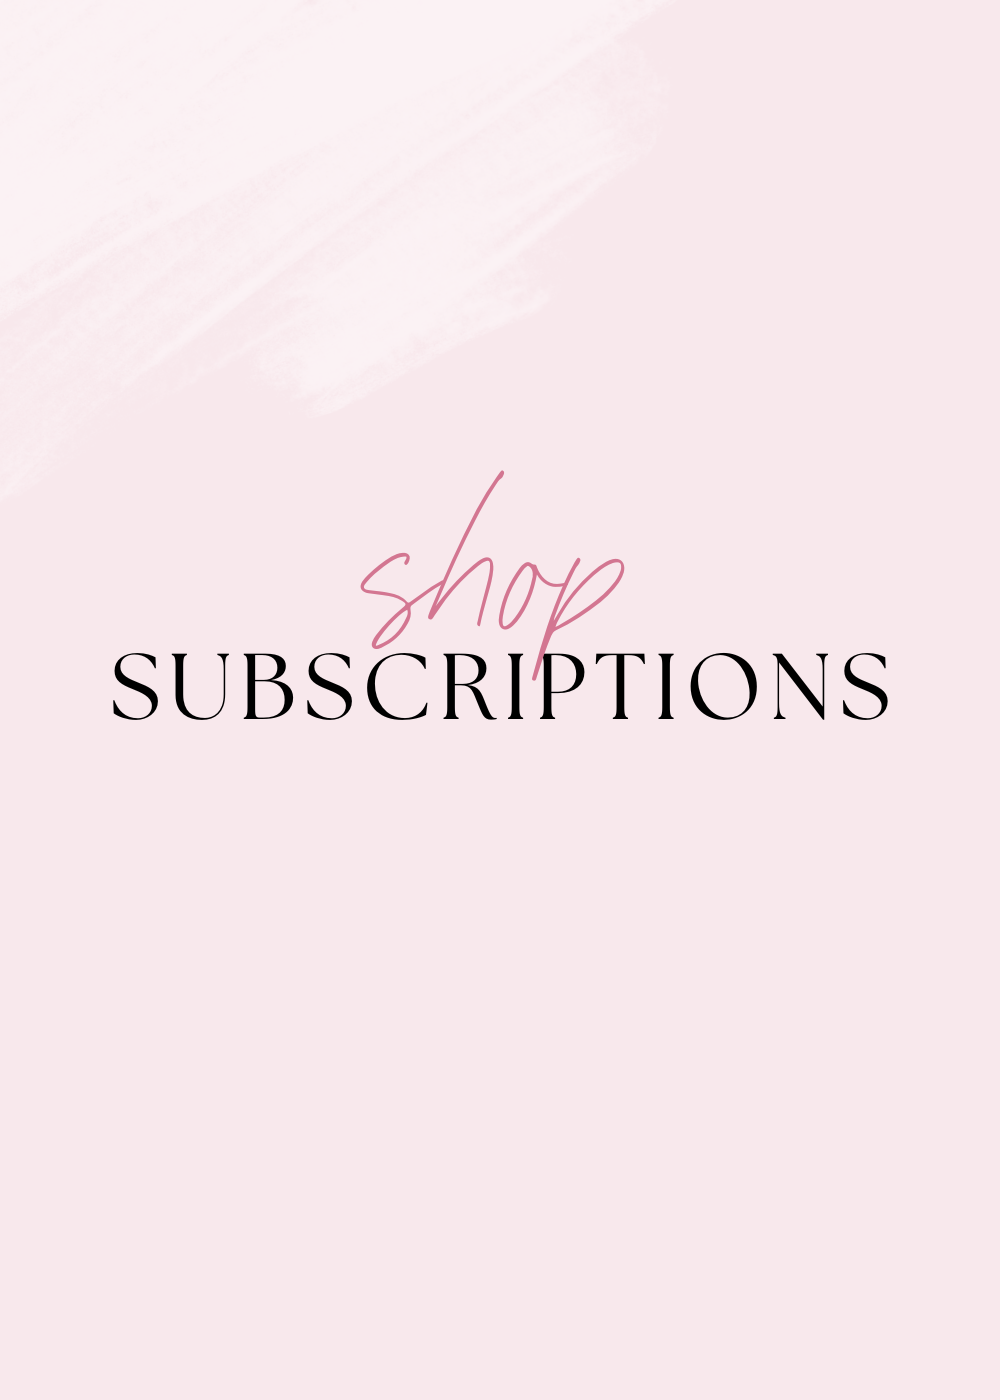 All Subscriptions